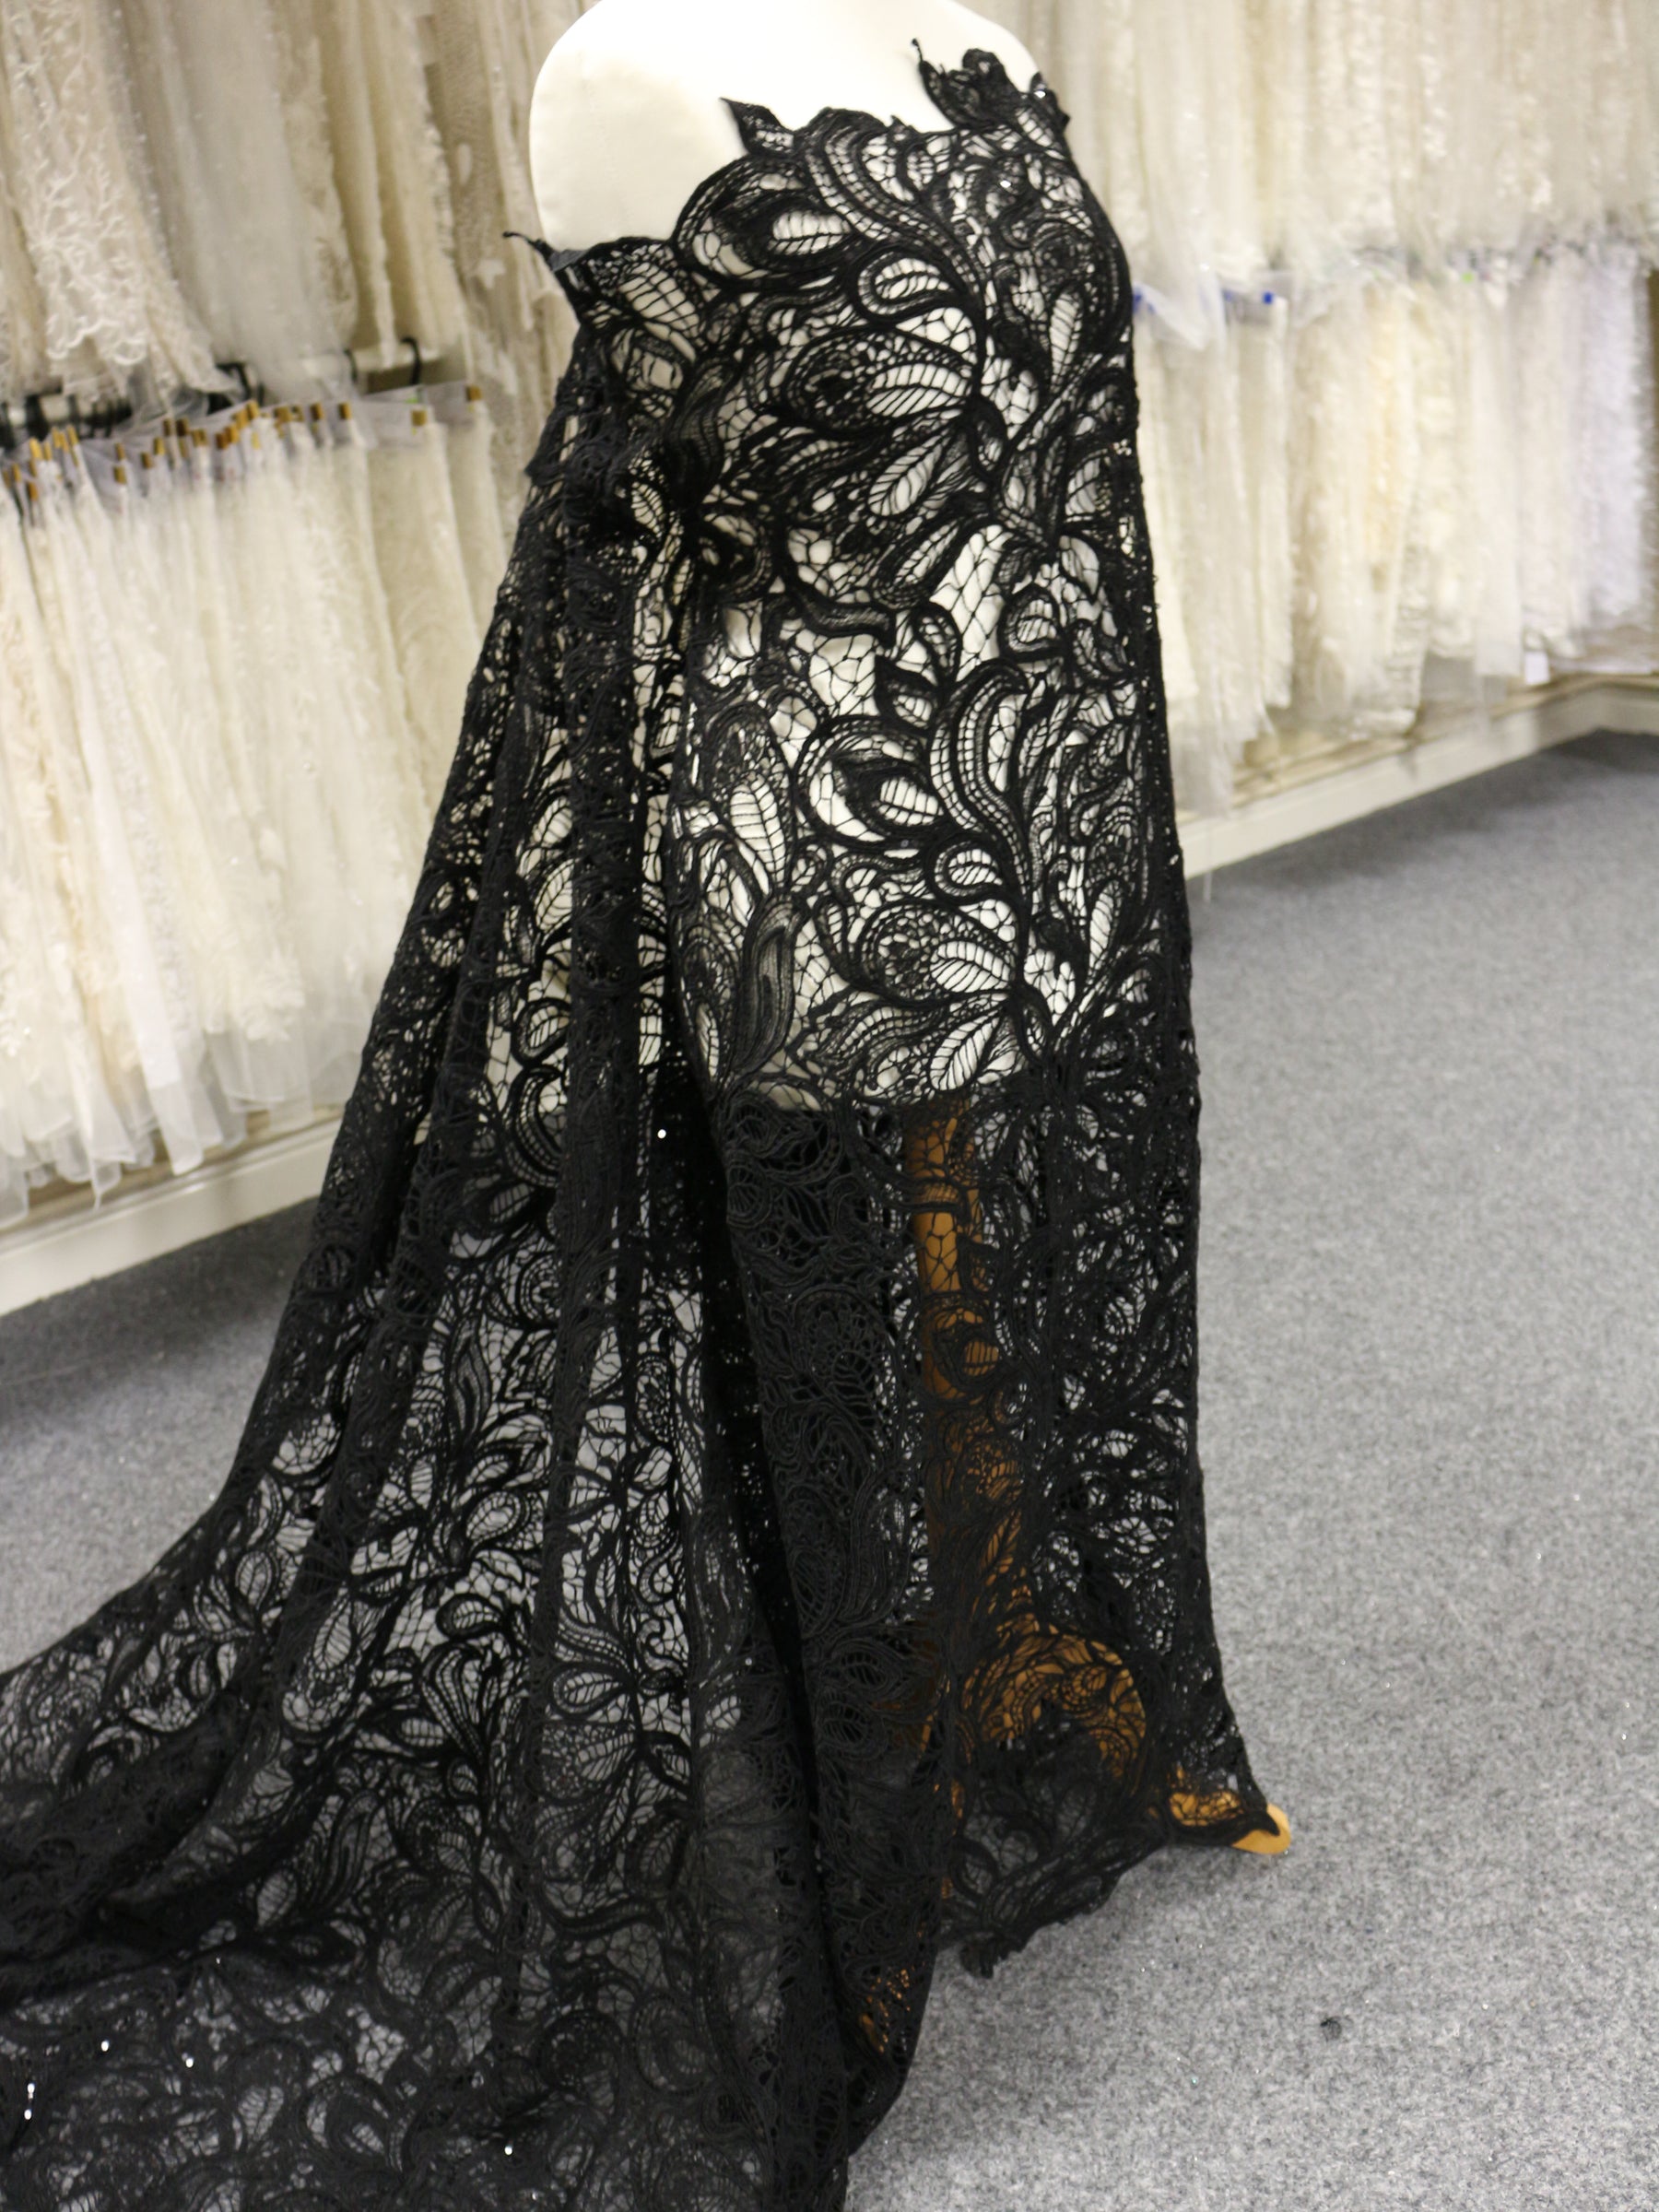 Black Corded & Sequinned Lace - Monet